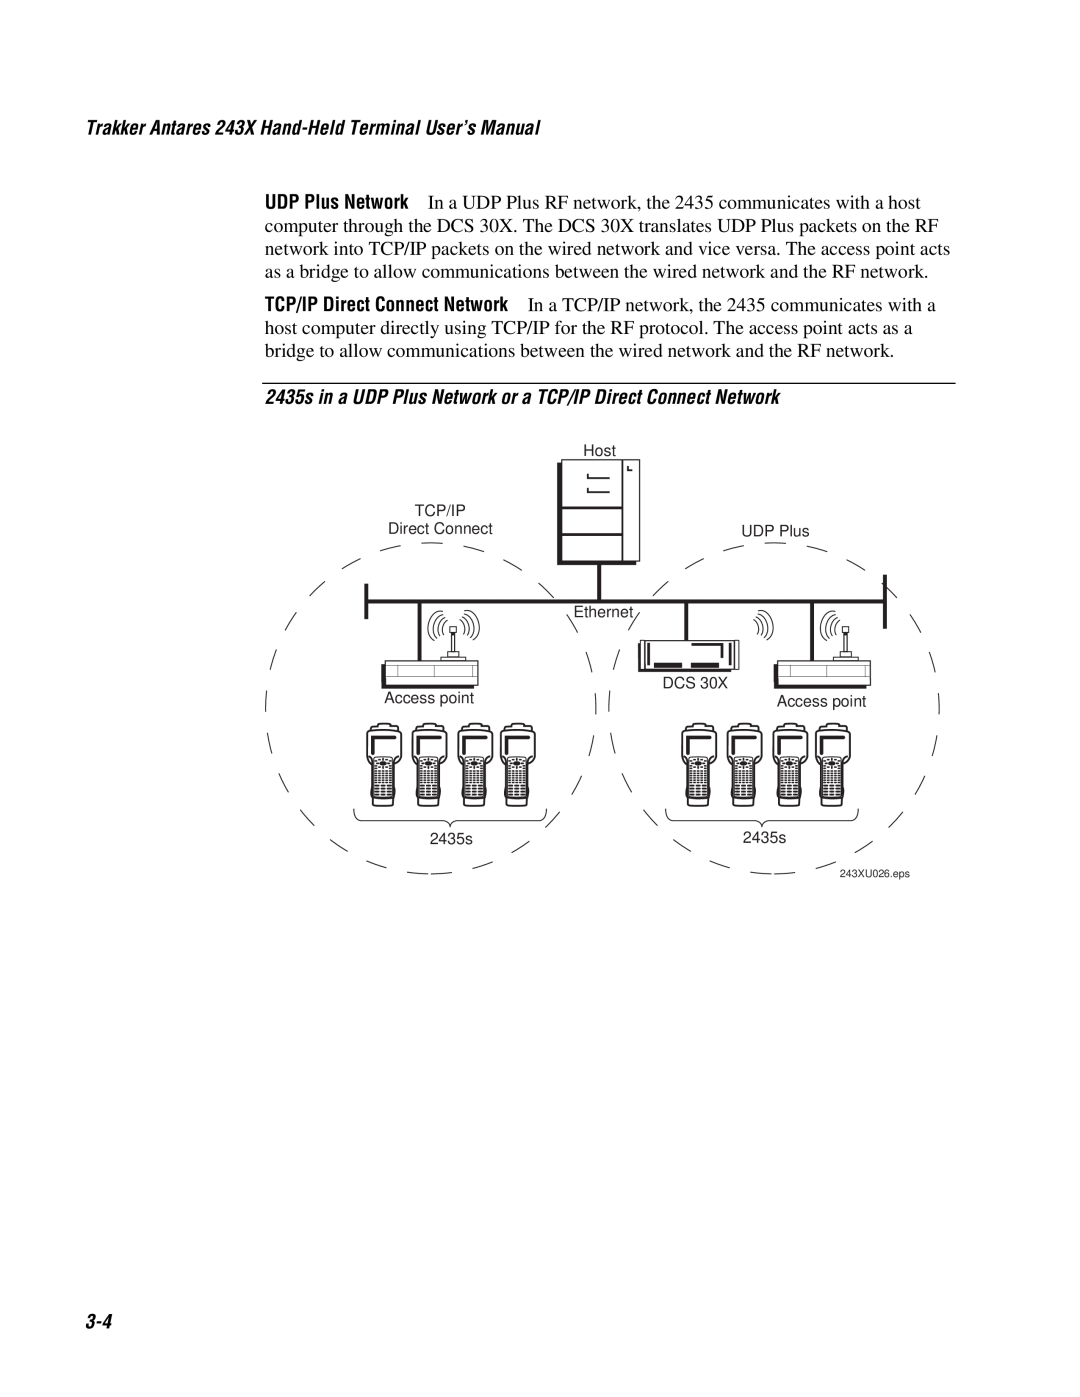 IBM user manual 2435s in a UDP Plus Network or a TCP/IP Direct Connect Network, 243XU026.eps 